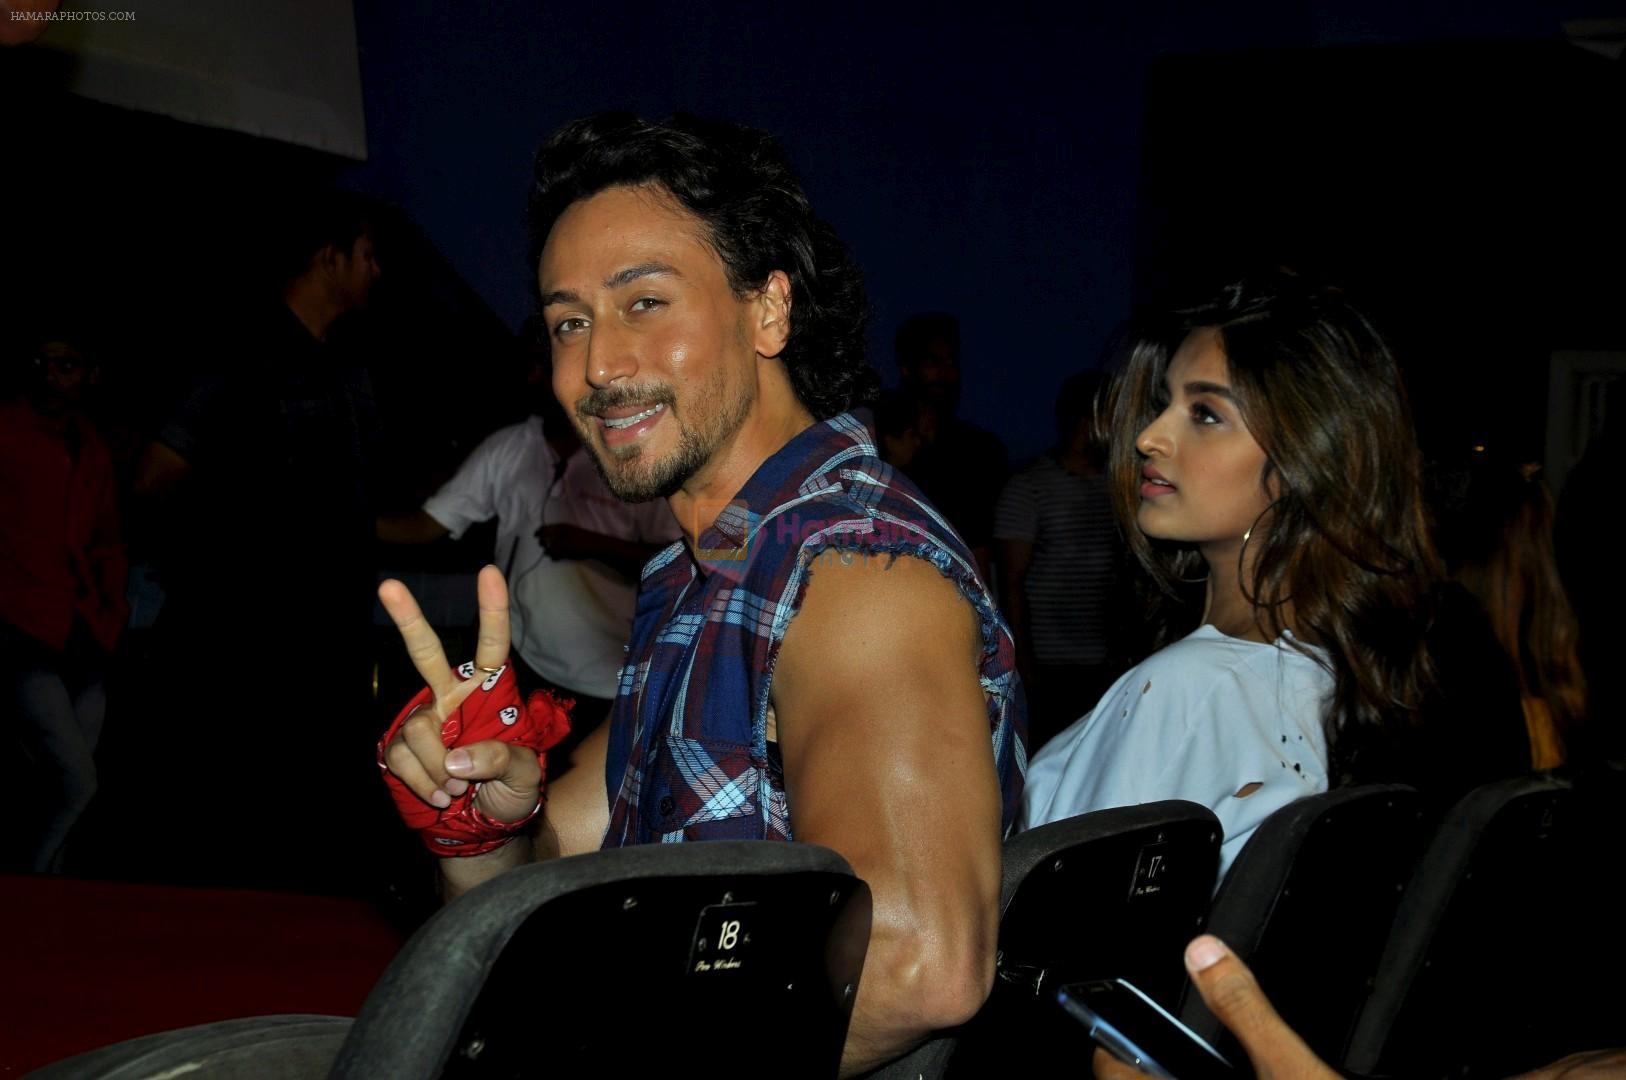 Tiger Shroff, Nidhhi Agerwal at the Song Launch Of Ding Dang For Film Munna Michael With Tiger Shroff & Nidhhi Agerwal on 19th June 2017